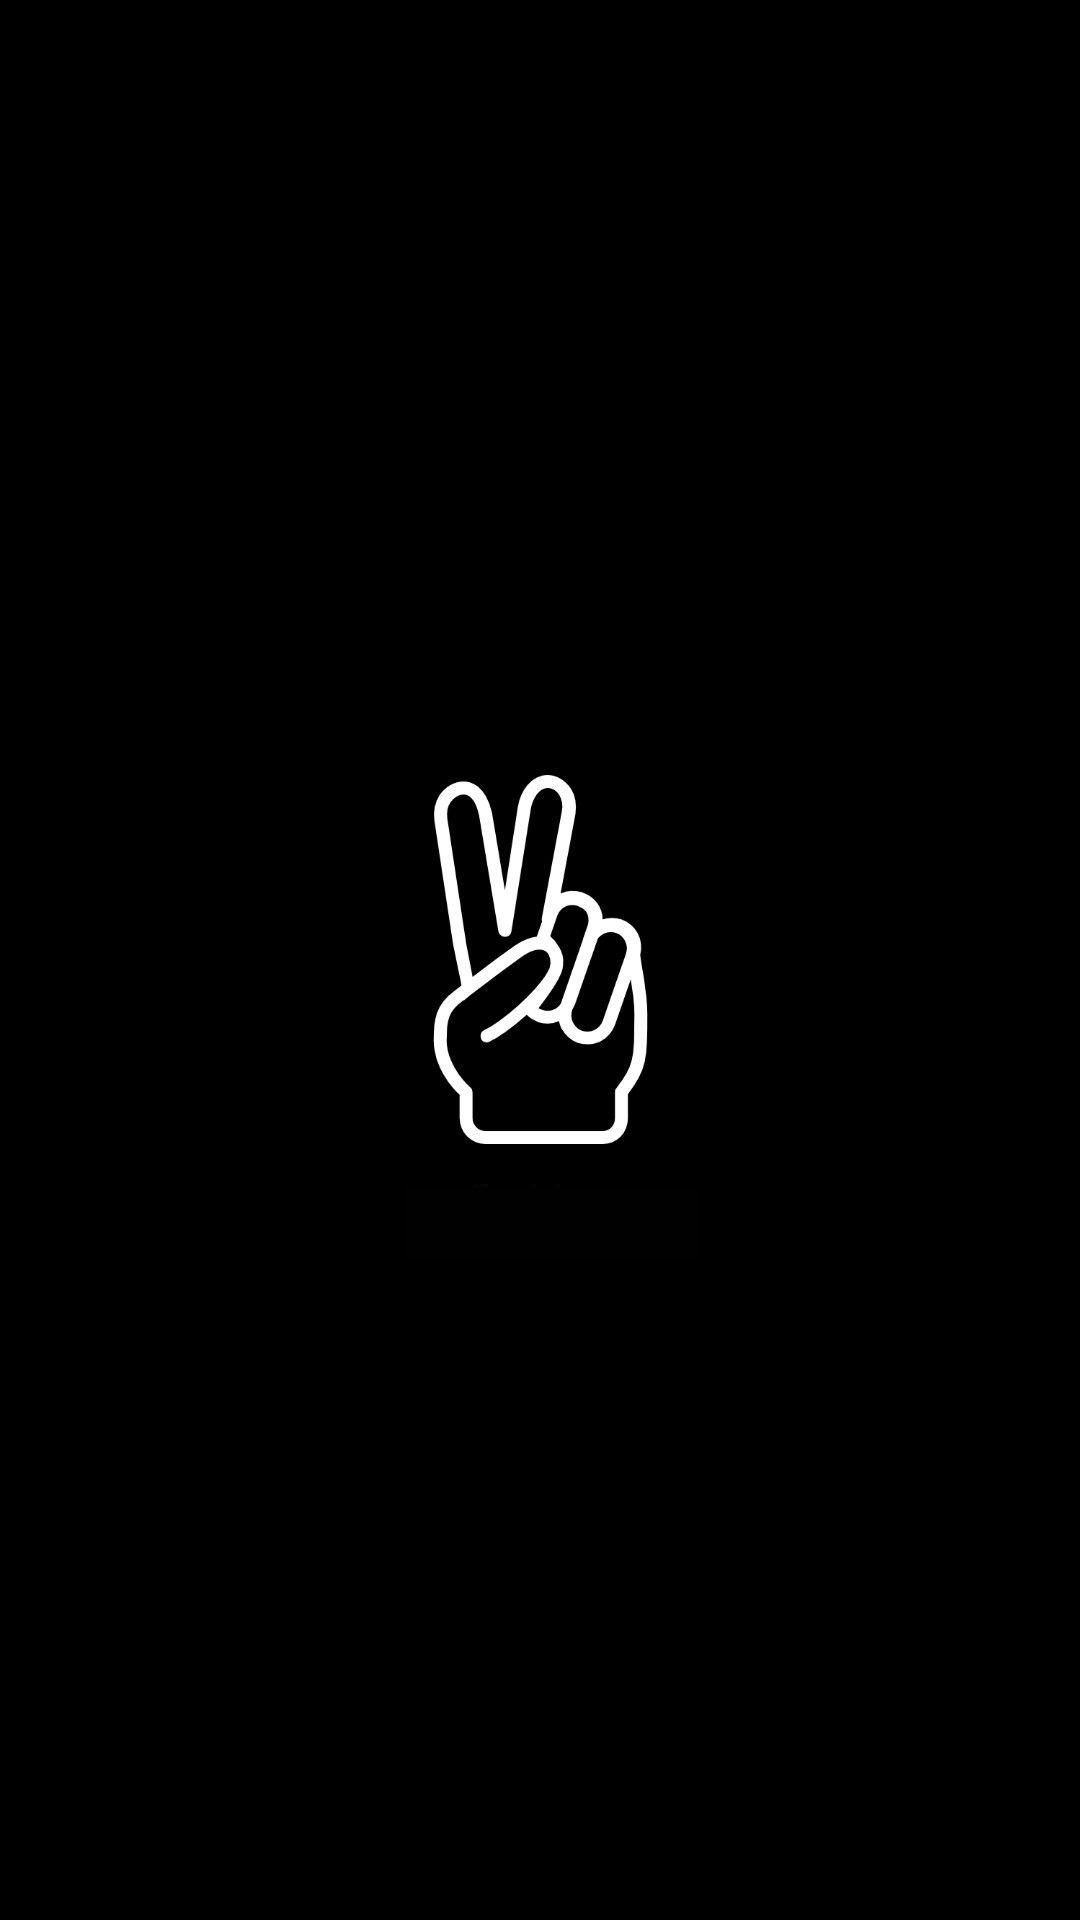 Peace sign, Instagram theme, Highlight icons, Black and white, 1080x1920 Full HD Phone